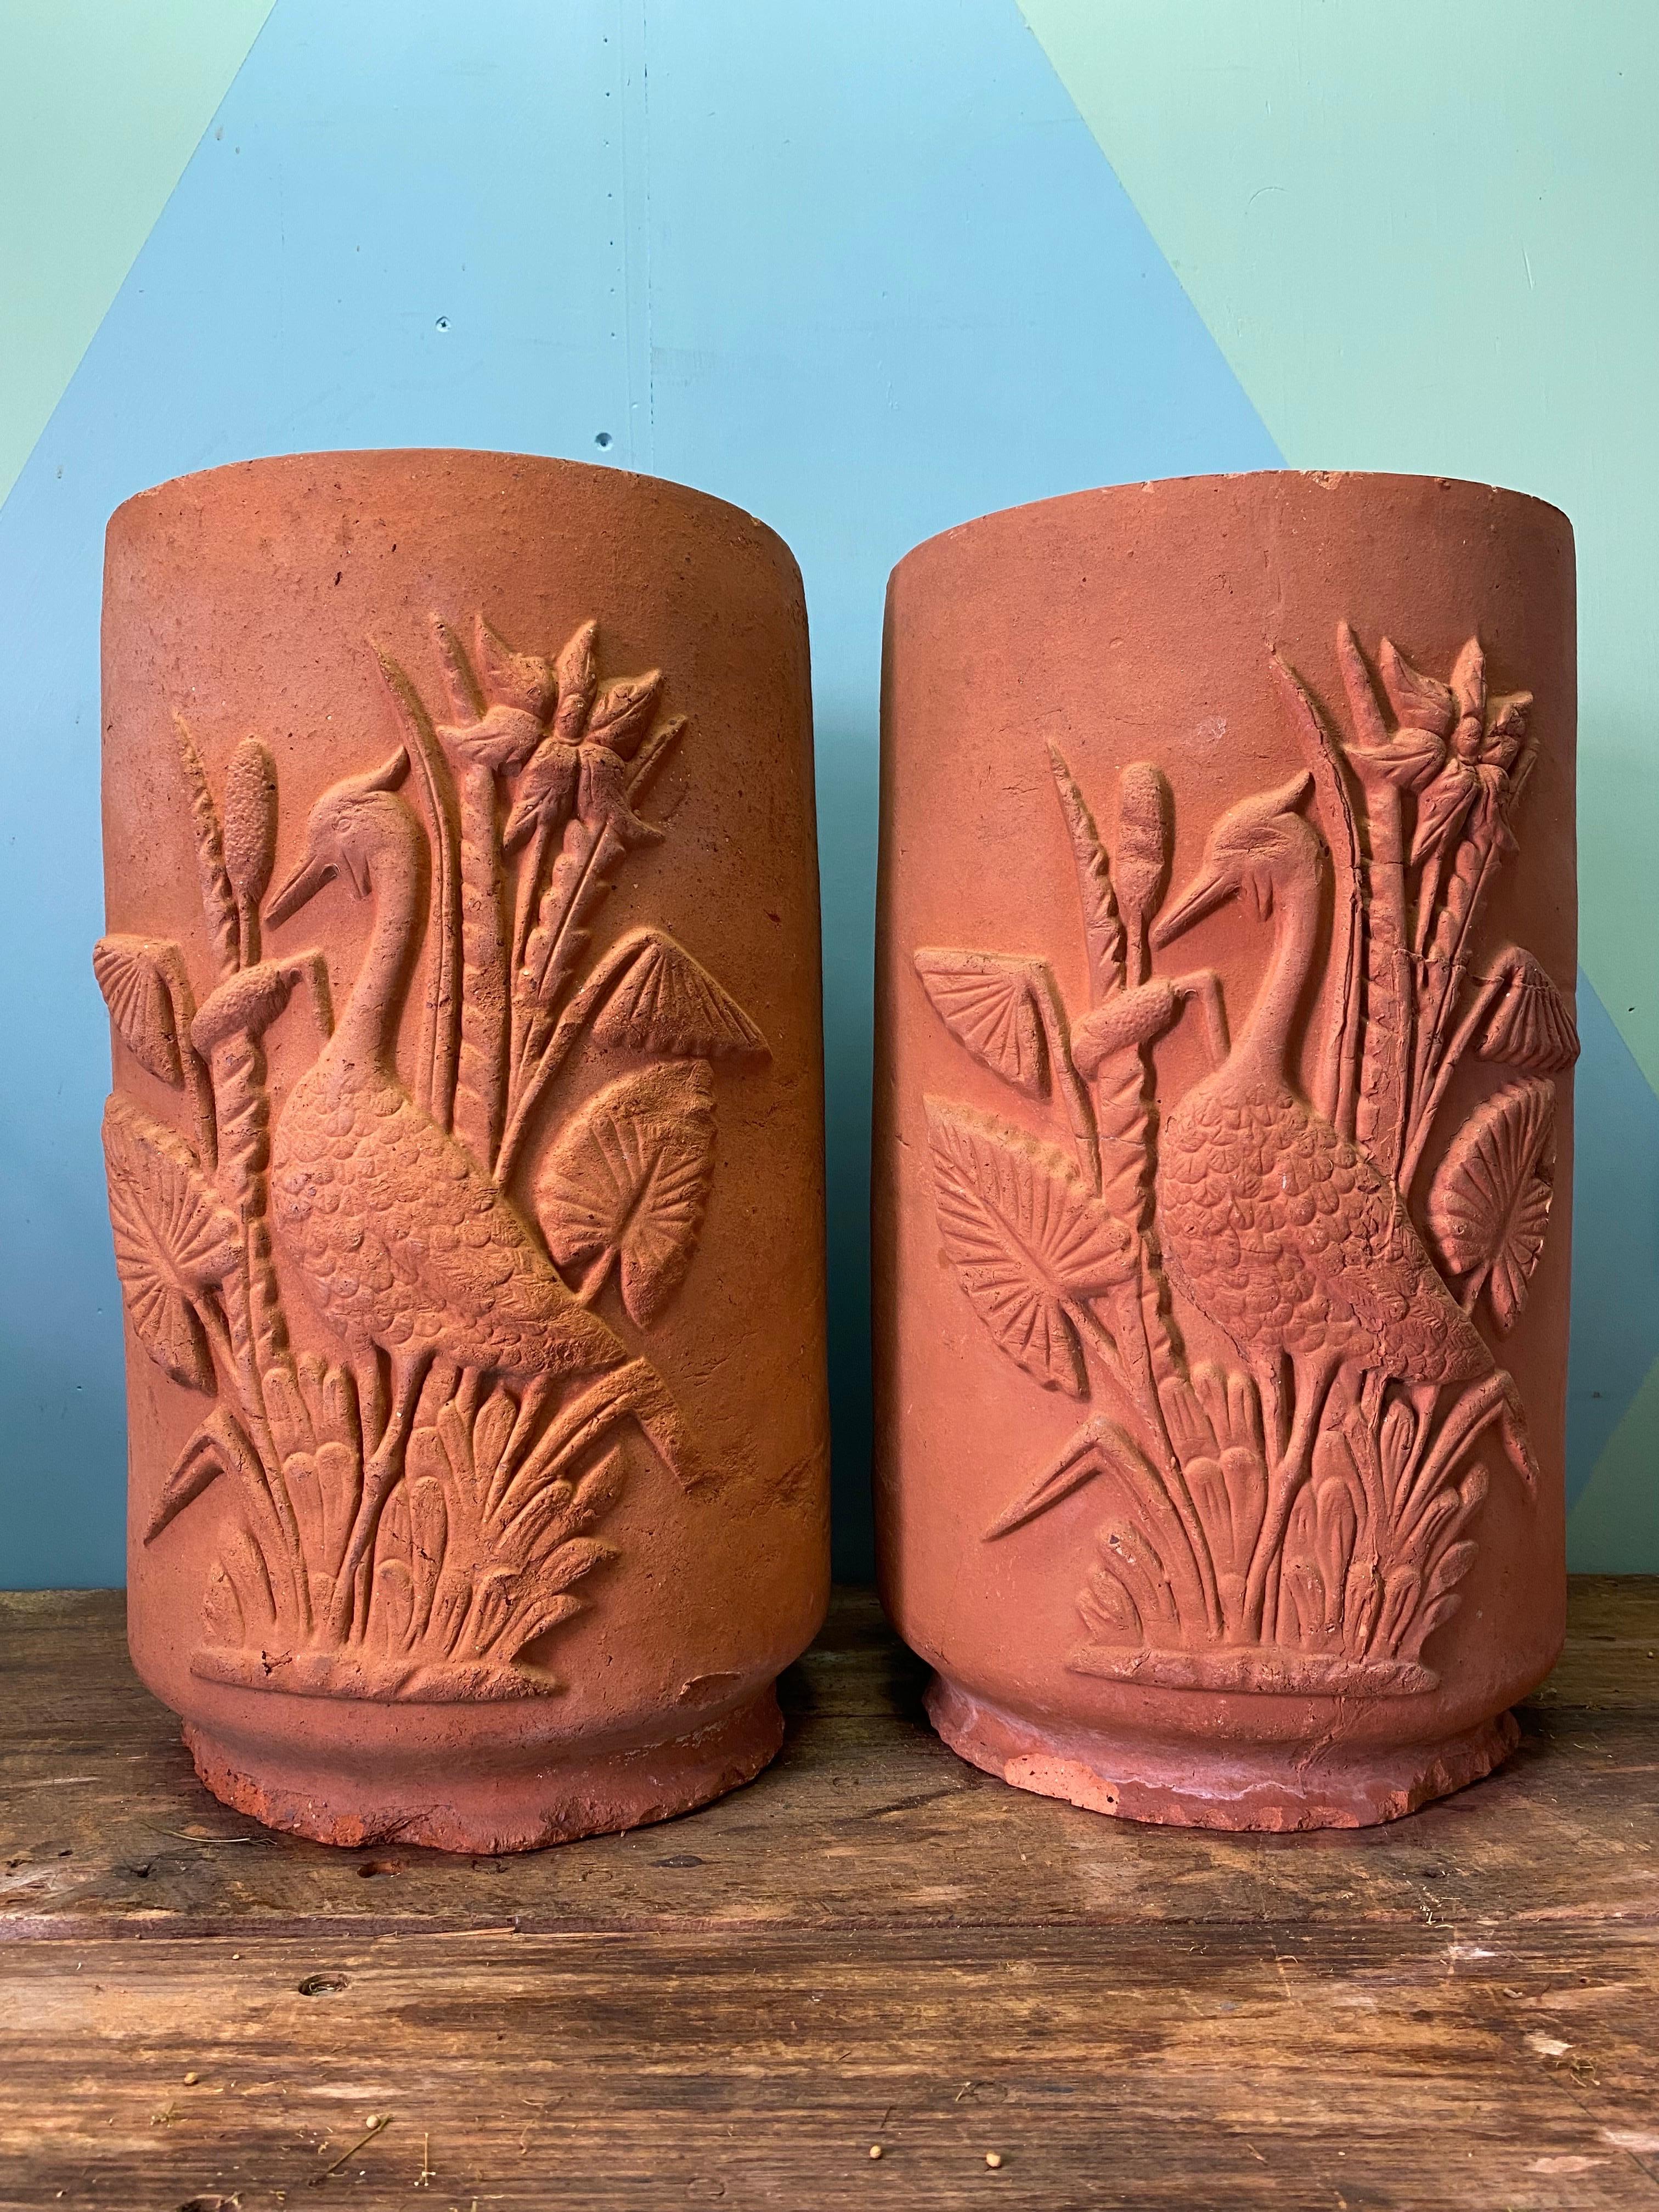 An exceptionally rare pair of John Campbell planter pots. The design is attributed to John Cambell's son, Rupert John Campbell. 

John Campbell produced decorative pots at his brick works and pottery in Launceston, Tasmania from 1880 until 1975.